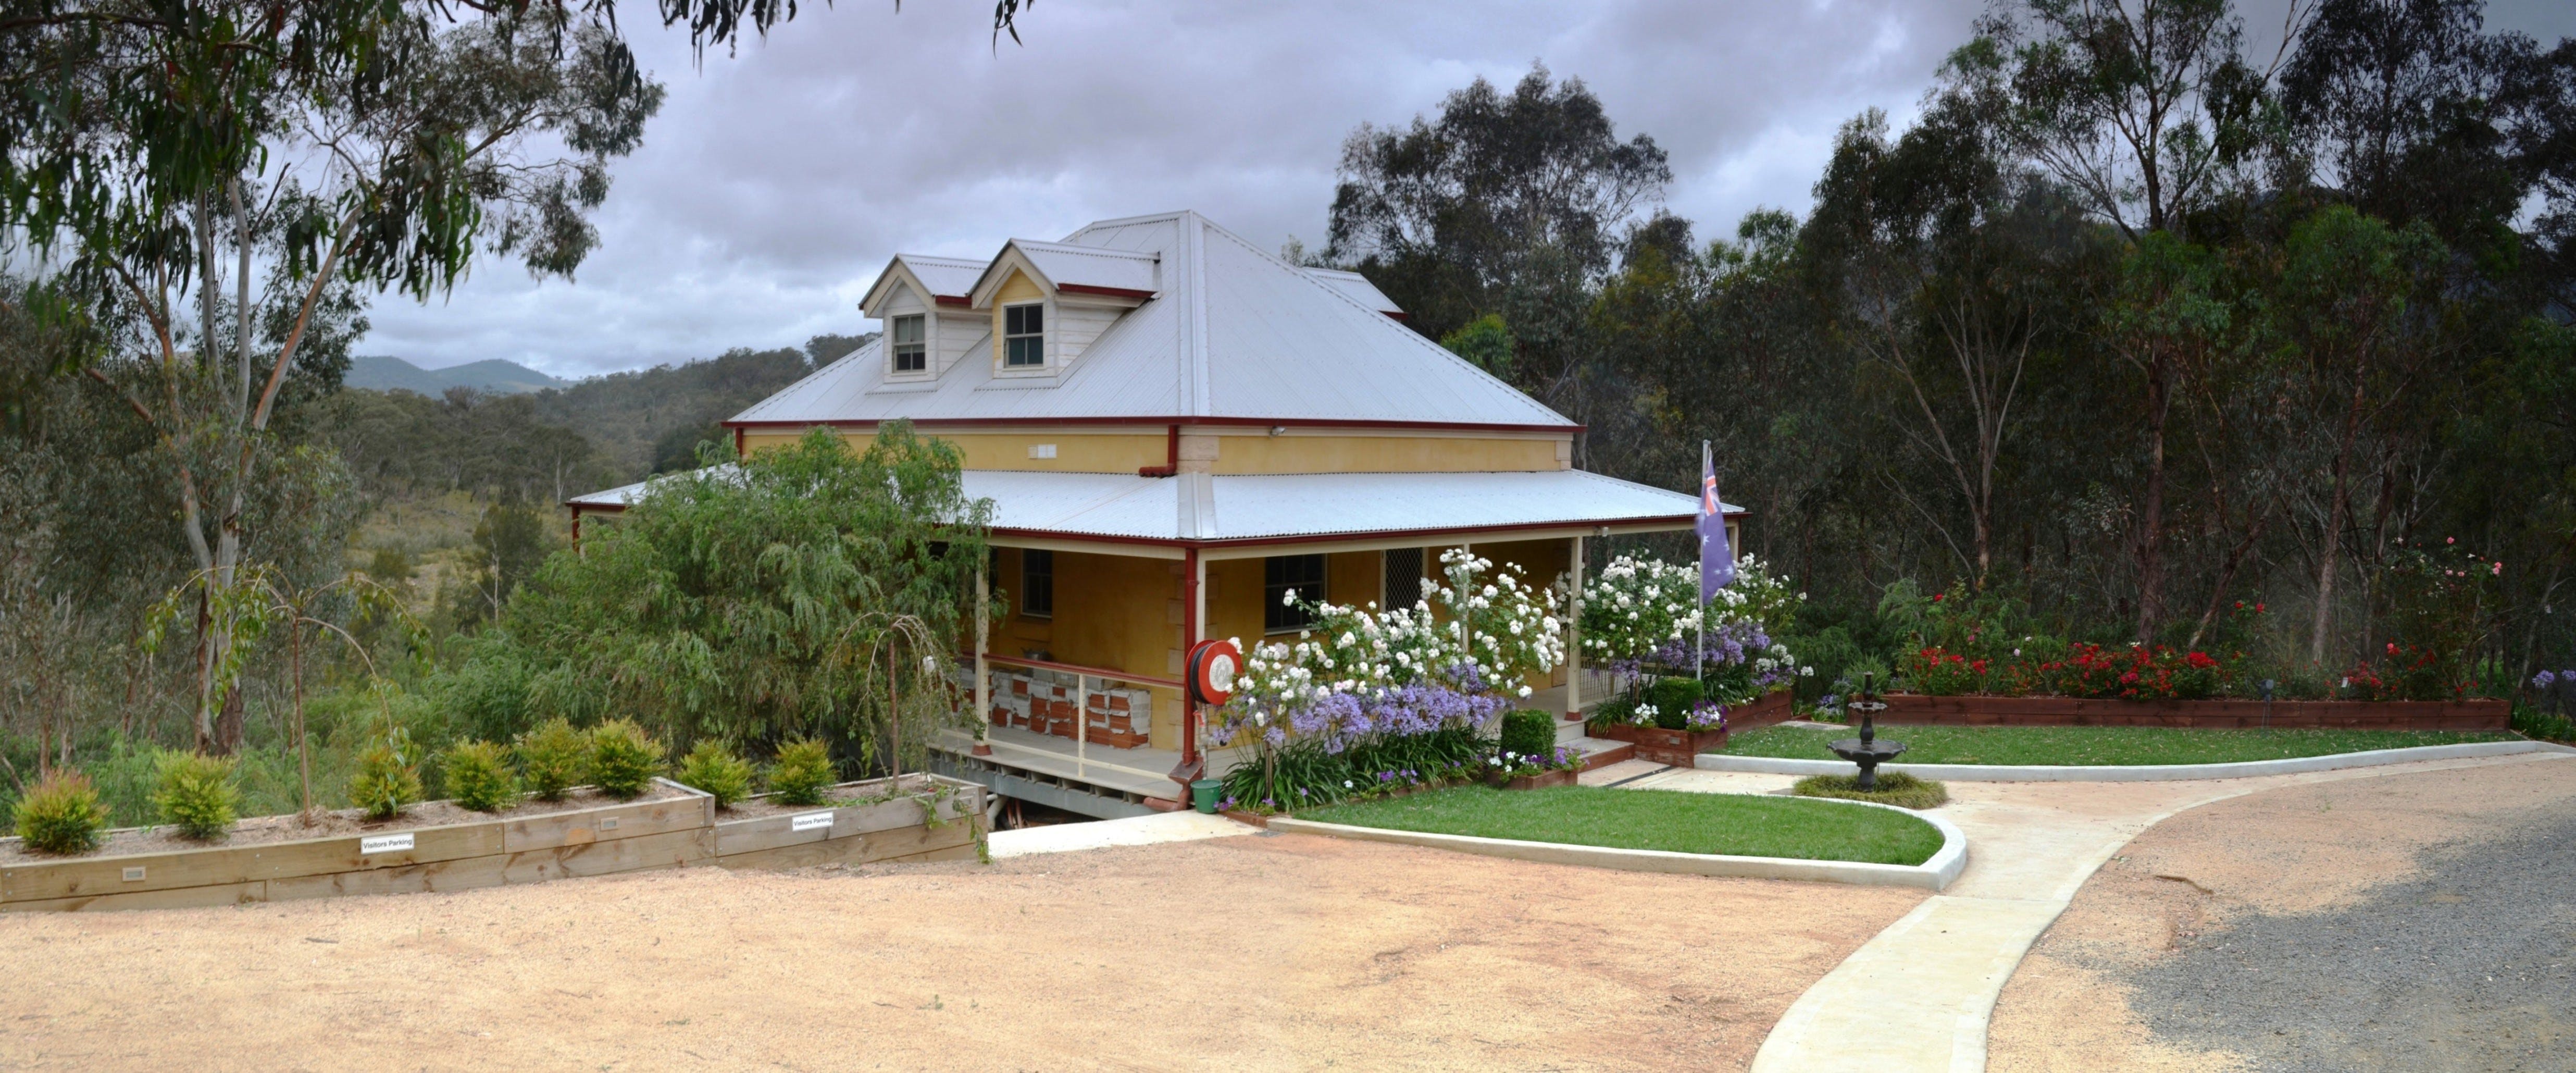 Tanwarra Lodge Bed and Breakfast - Redcliffe Tourism